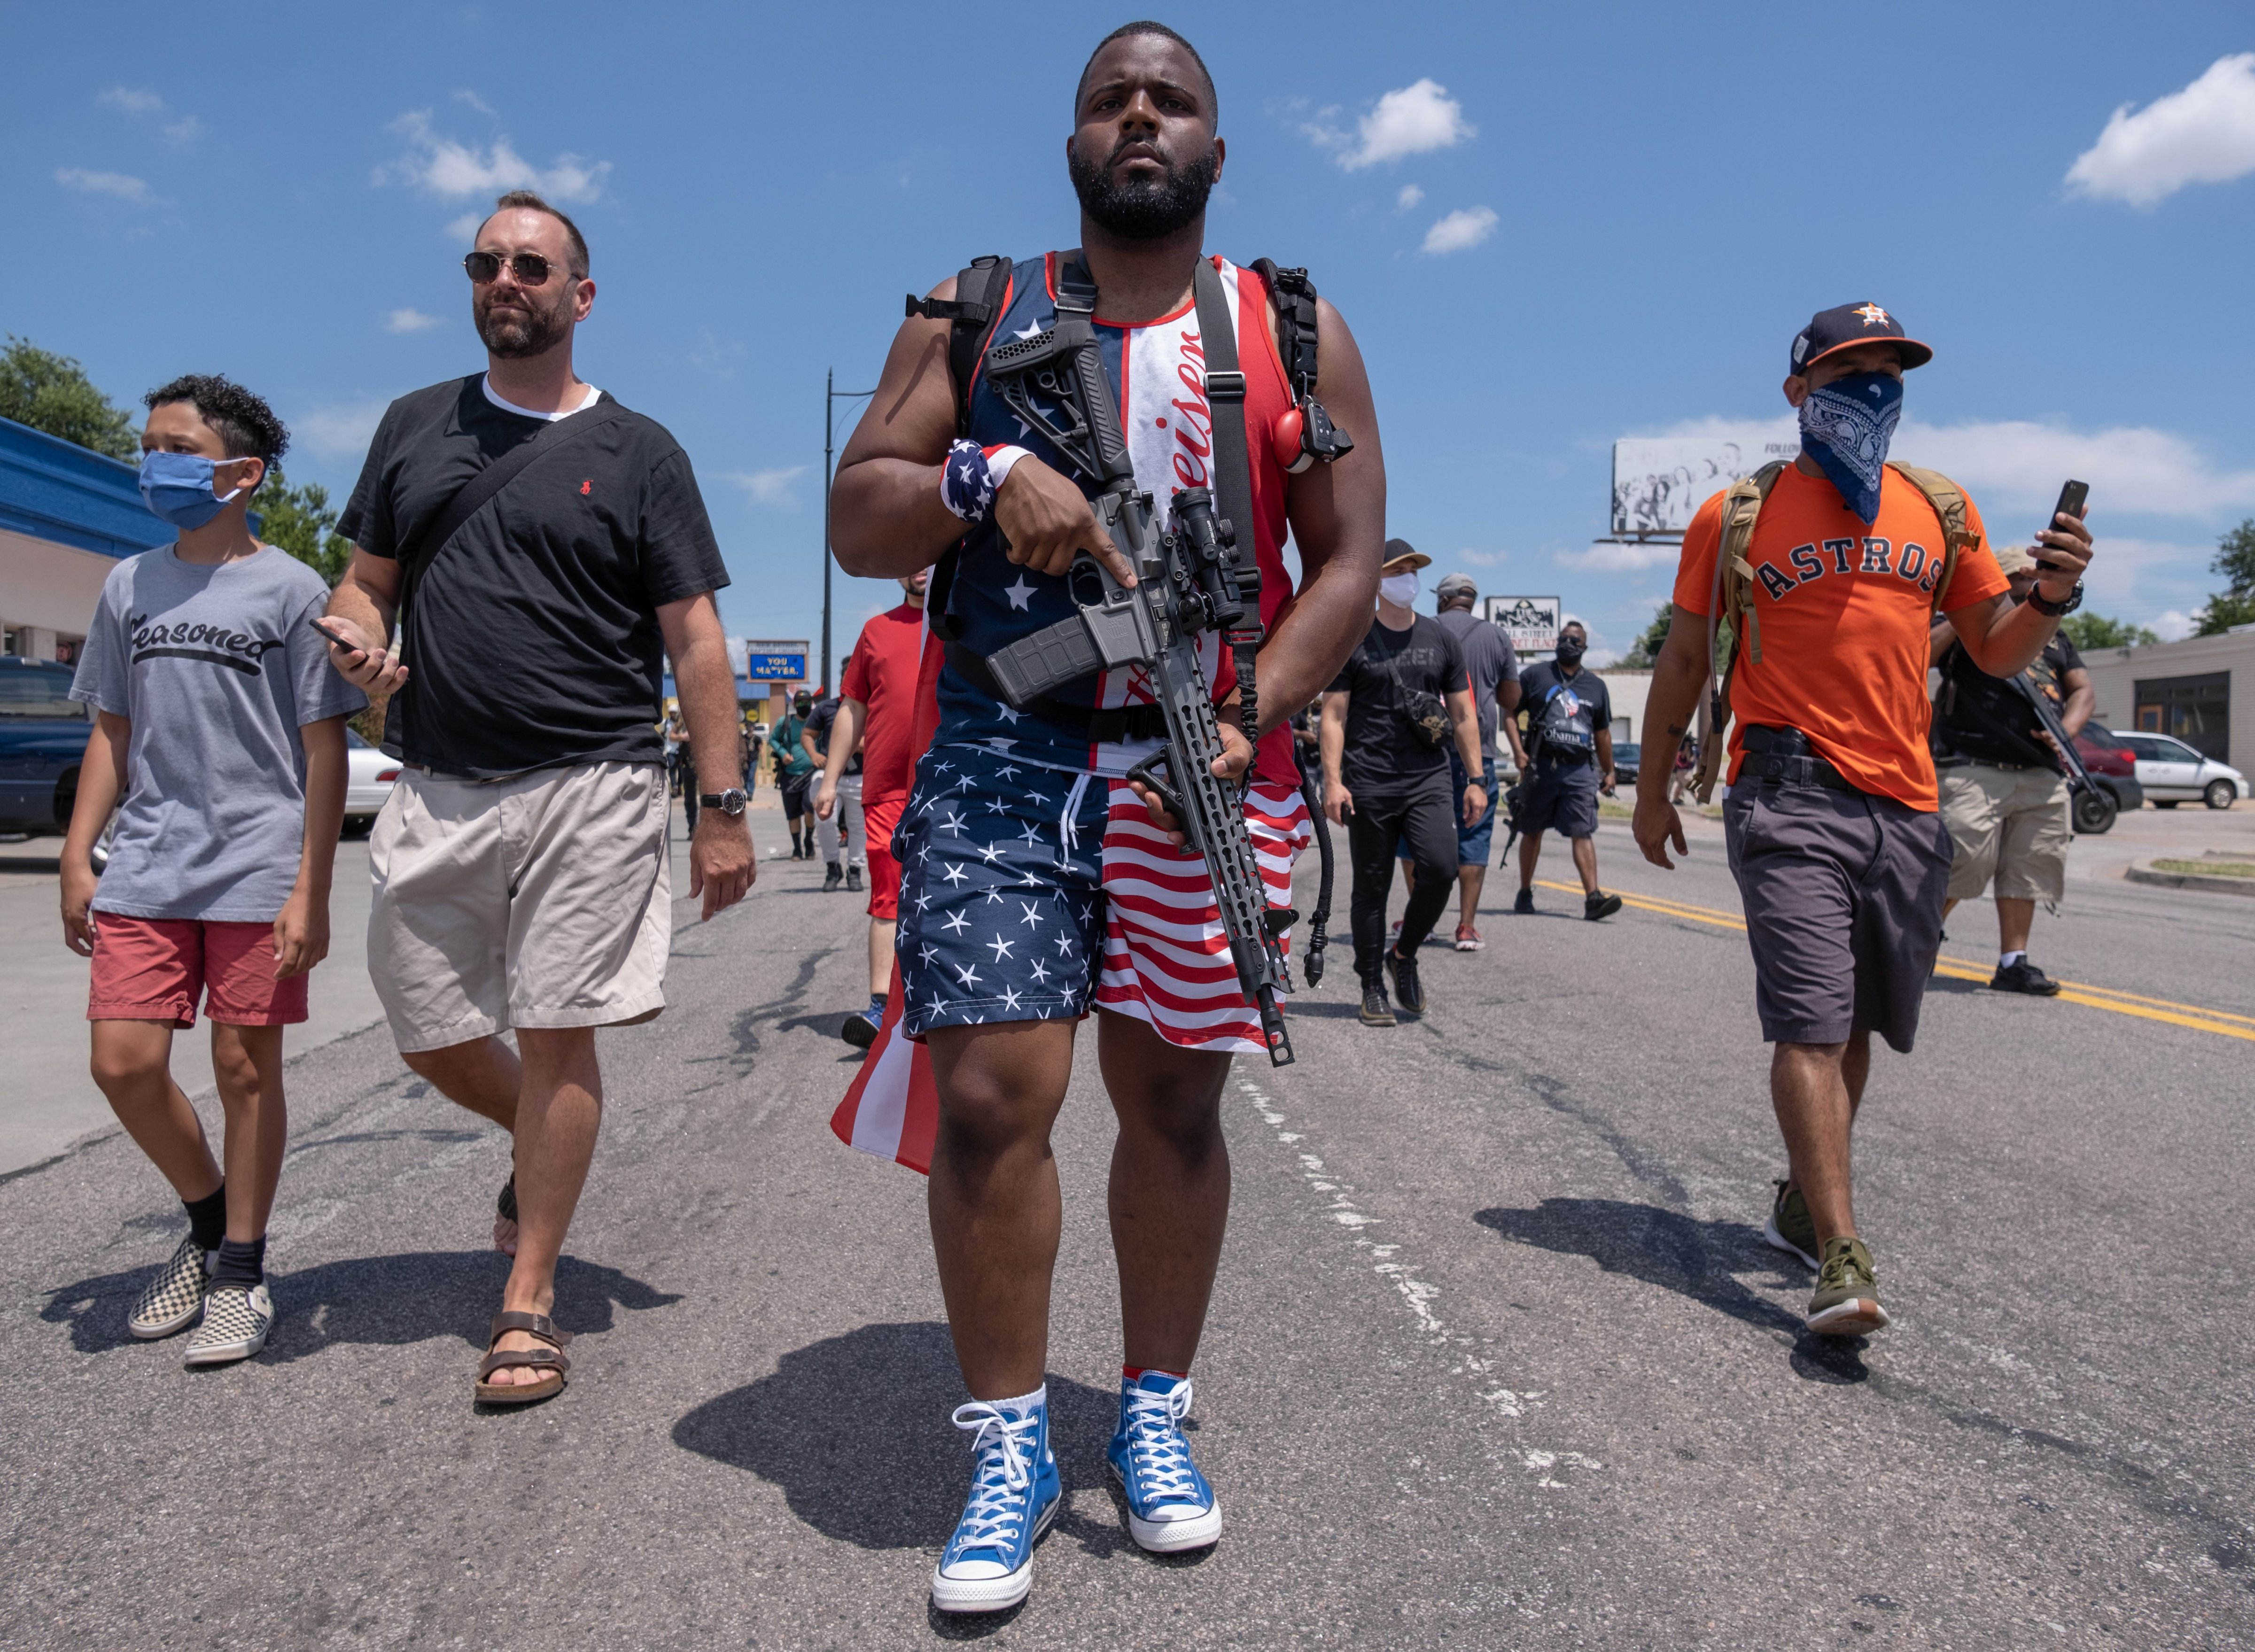 Black gun owners take part in a rally in support of the Second Amendment in Oklahoma City on June 20, 2020. (Seth Herald—AFP/Getty Images)